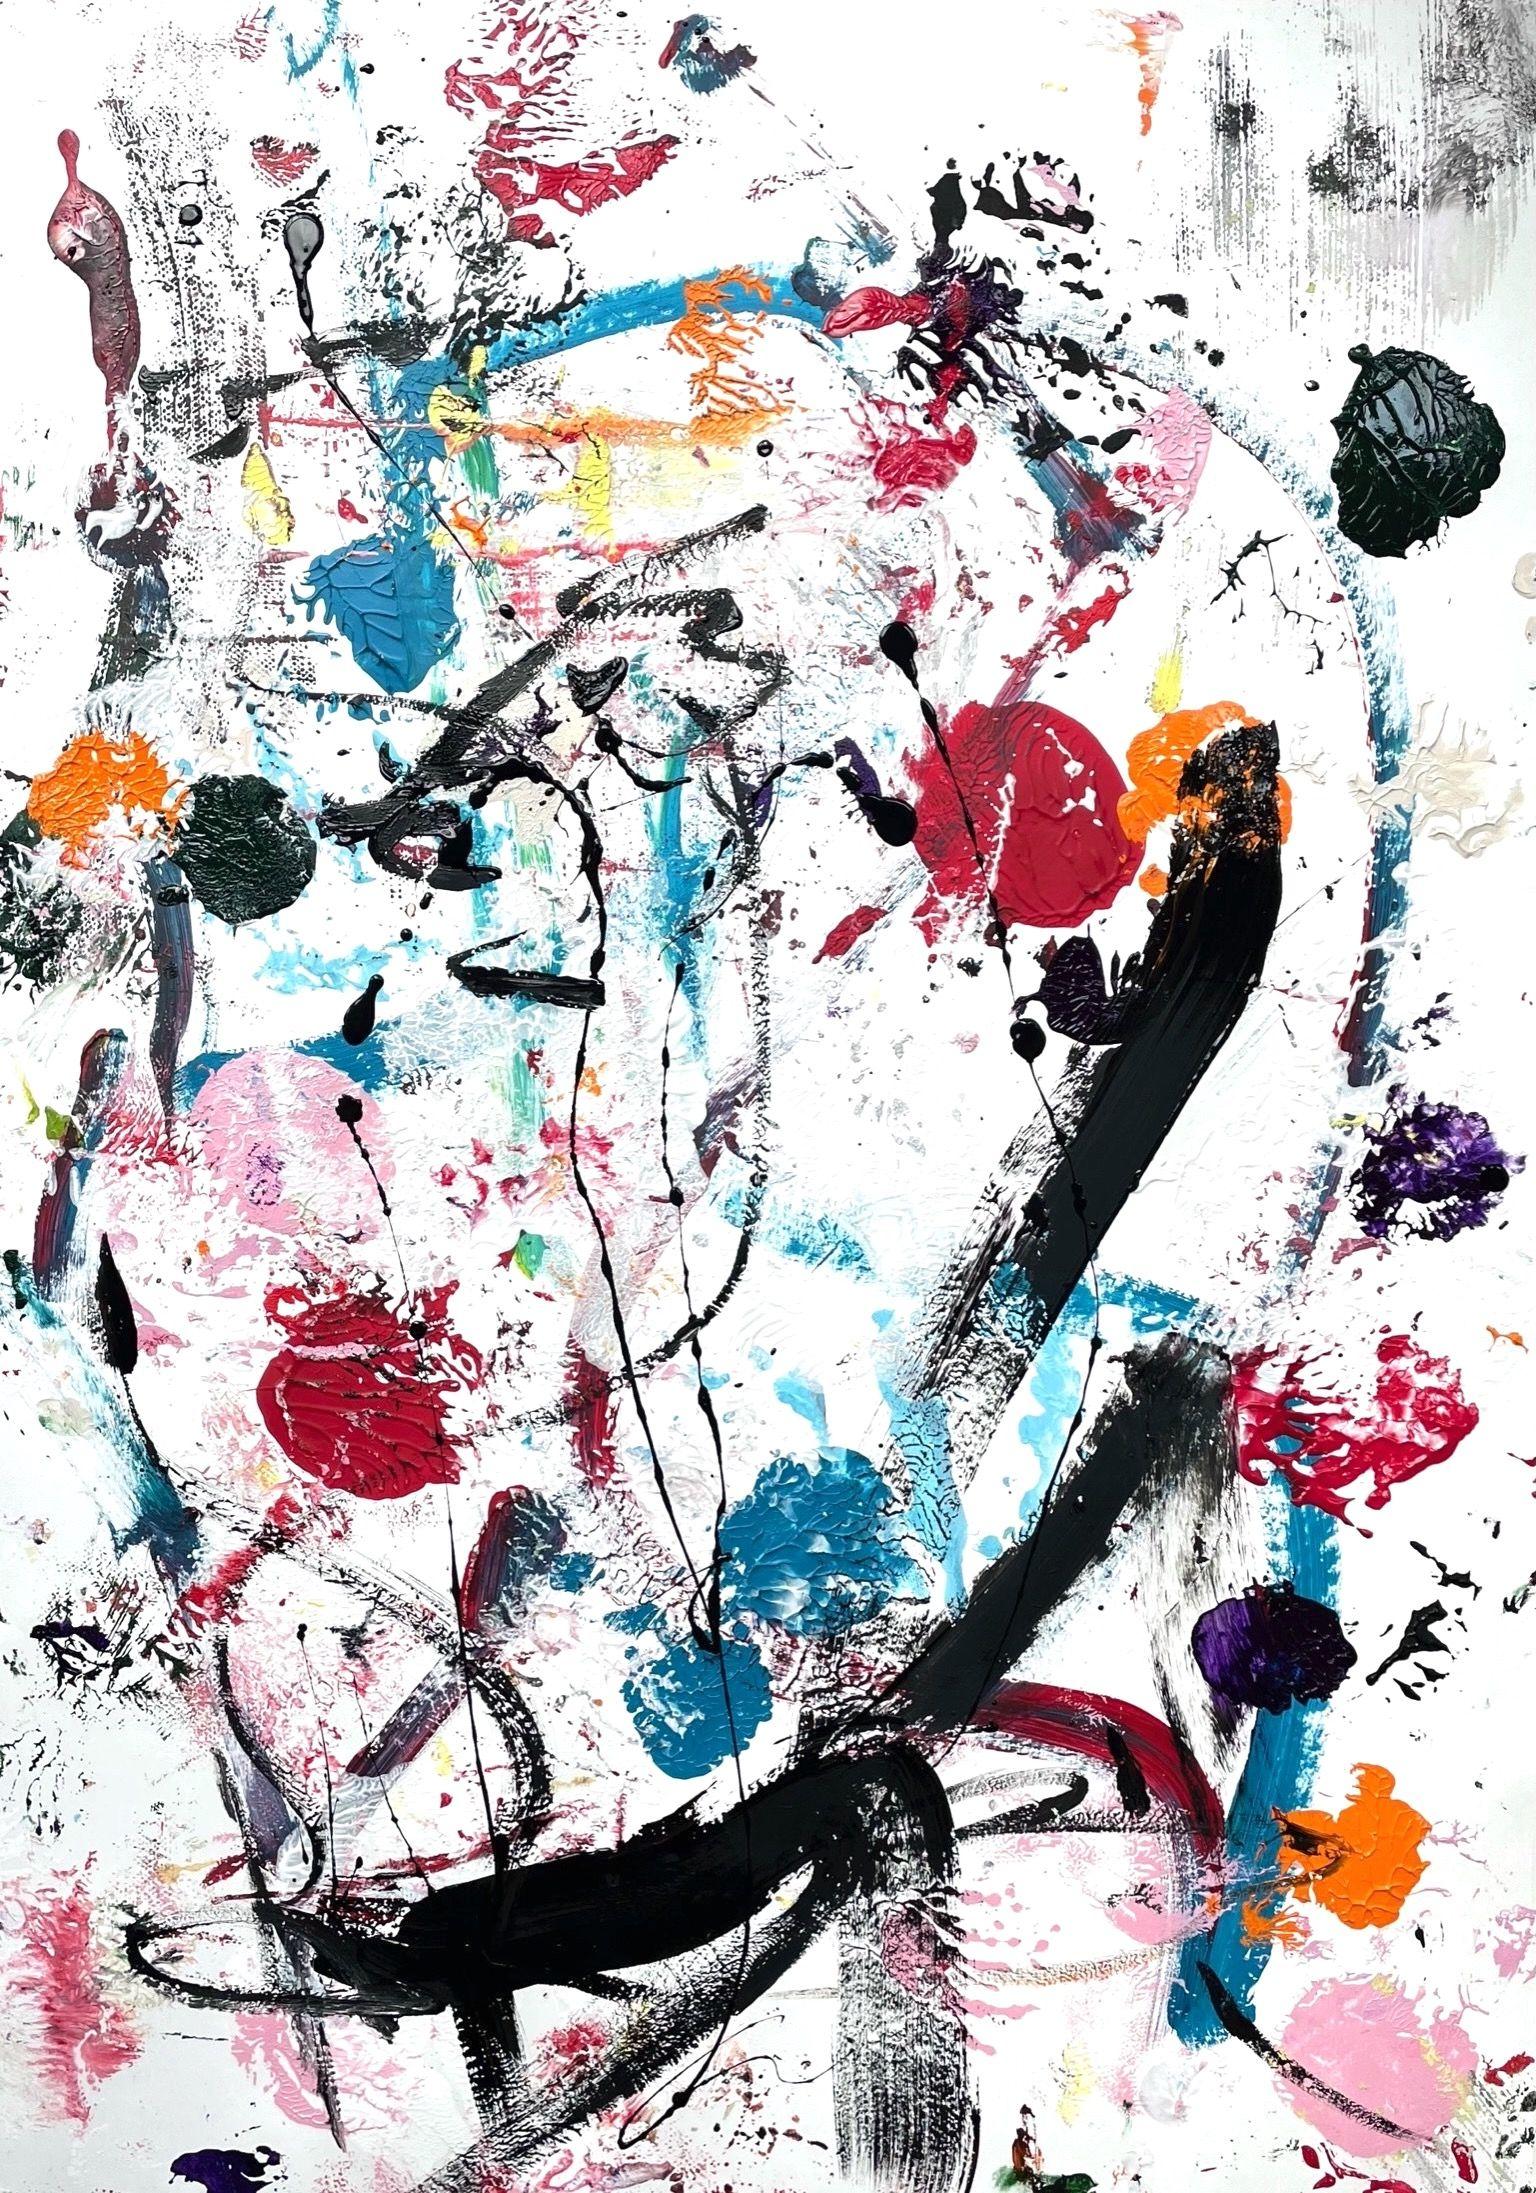   "Holy Moly 1" is a vibrant and passionate artwork on paper. It is full of movement and action.  The main colors are red, black, blue and white.     This artwork is a one of a kind painting, an absolutely spontaneous, colorful and unique creation